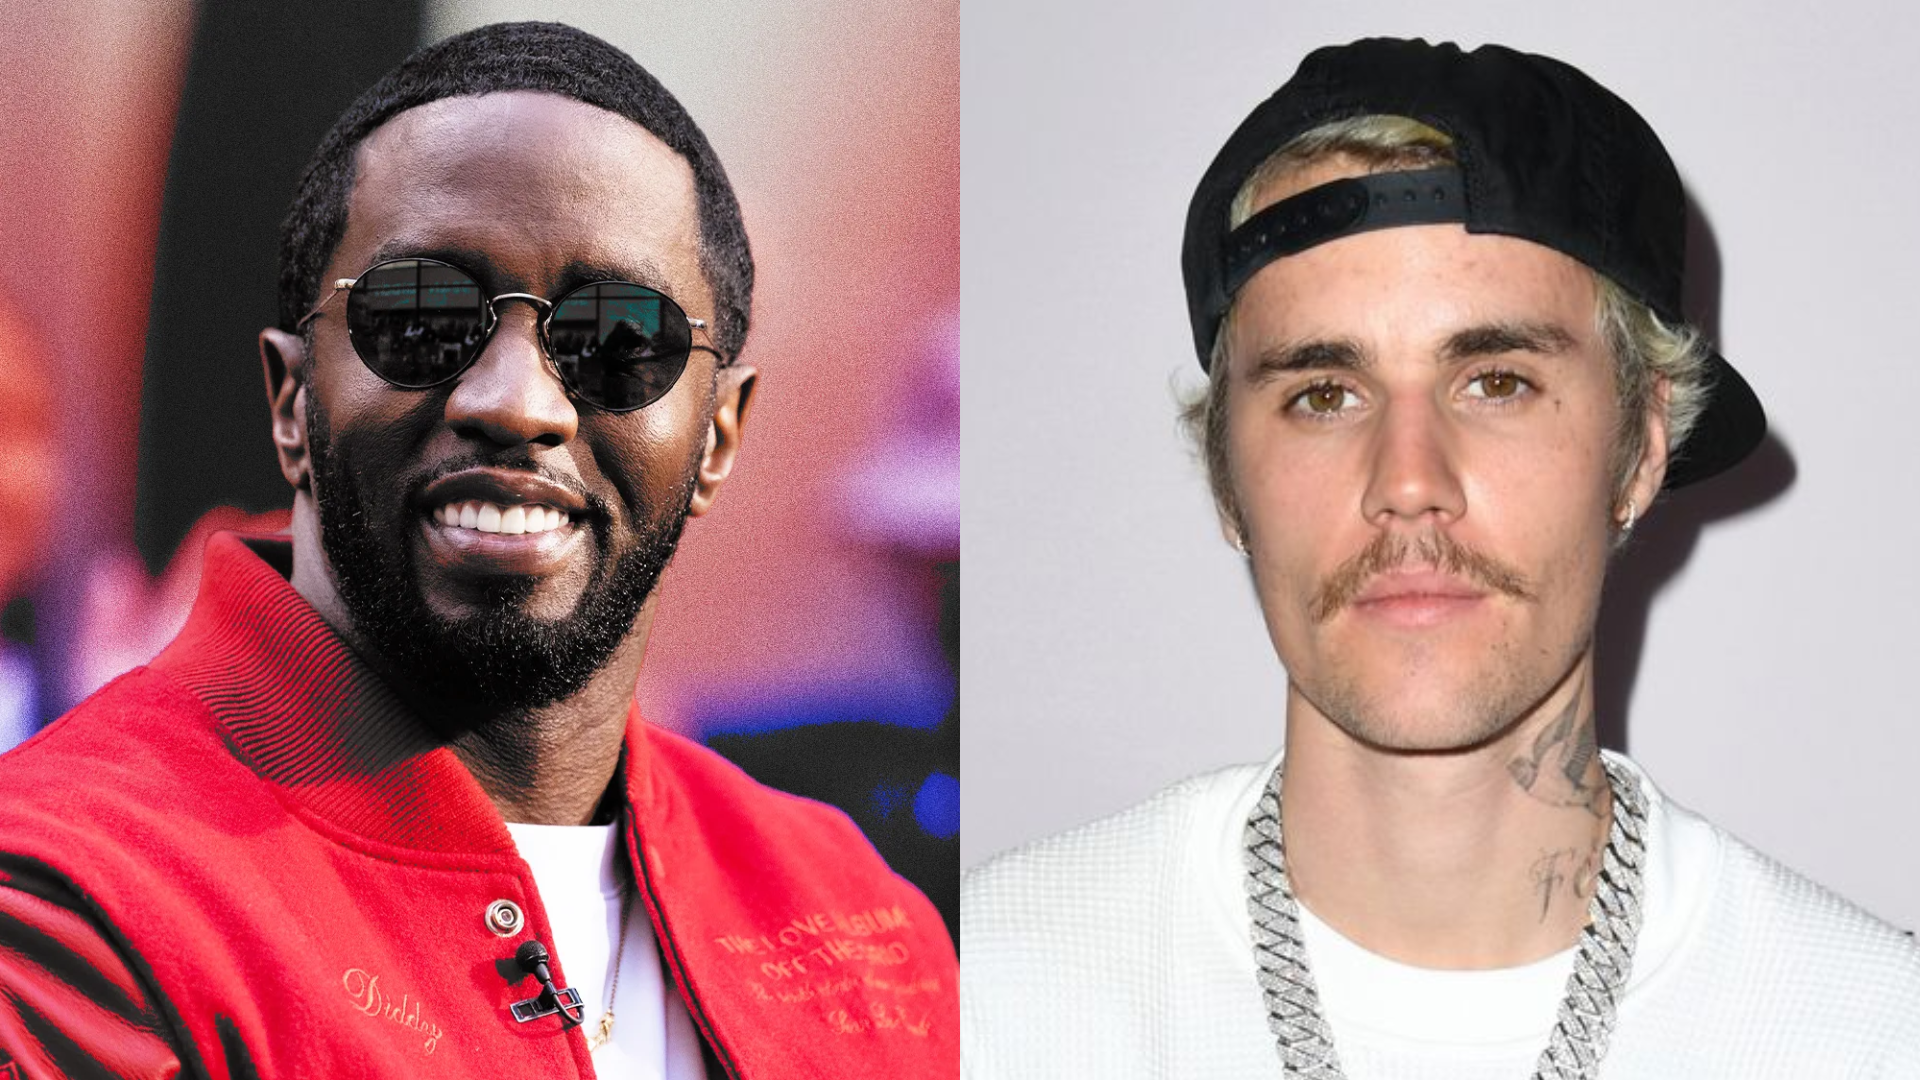 P Diddy Gets Slammed For Inappropriate Behaviour With Teen Justin Bieber In Resurfaced Videos Amid S*xual Assault Accusations